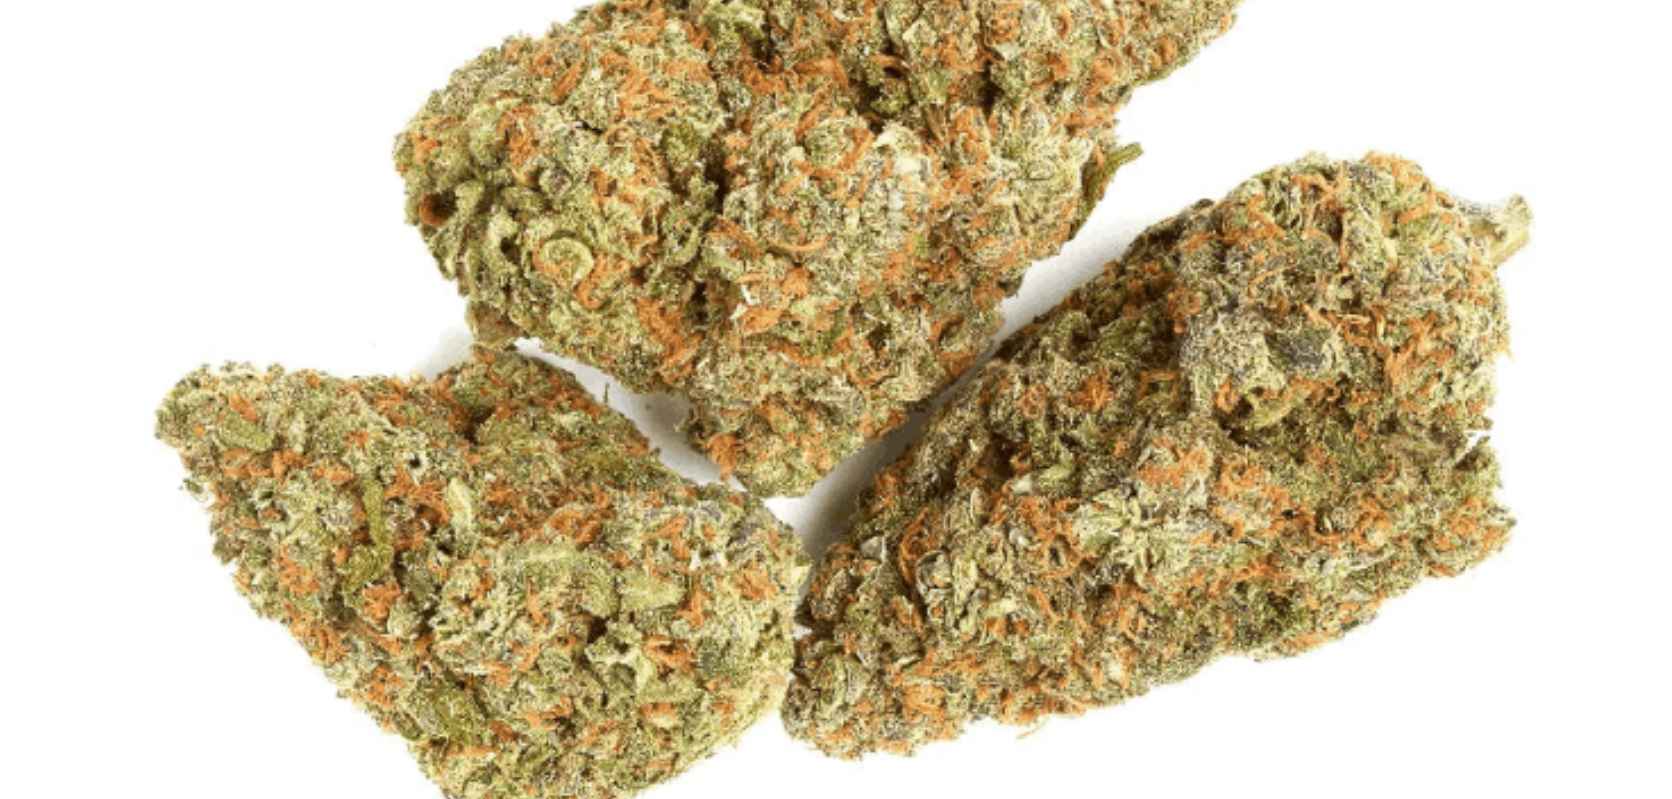 Pineapple Nuken strain is a 50/50 indica to sativa hybrid with an electrifying pineapple and zesty citrus flavour. 